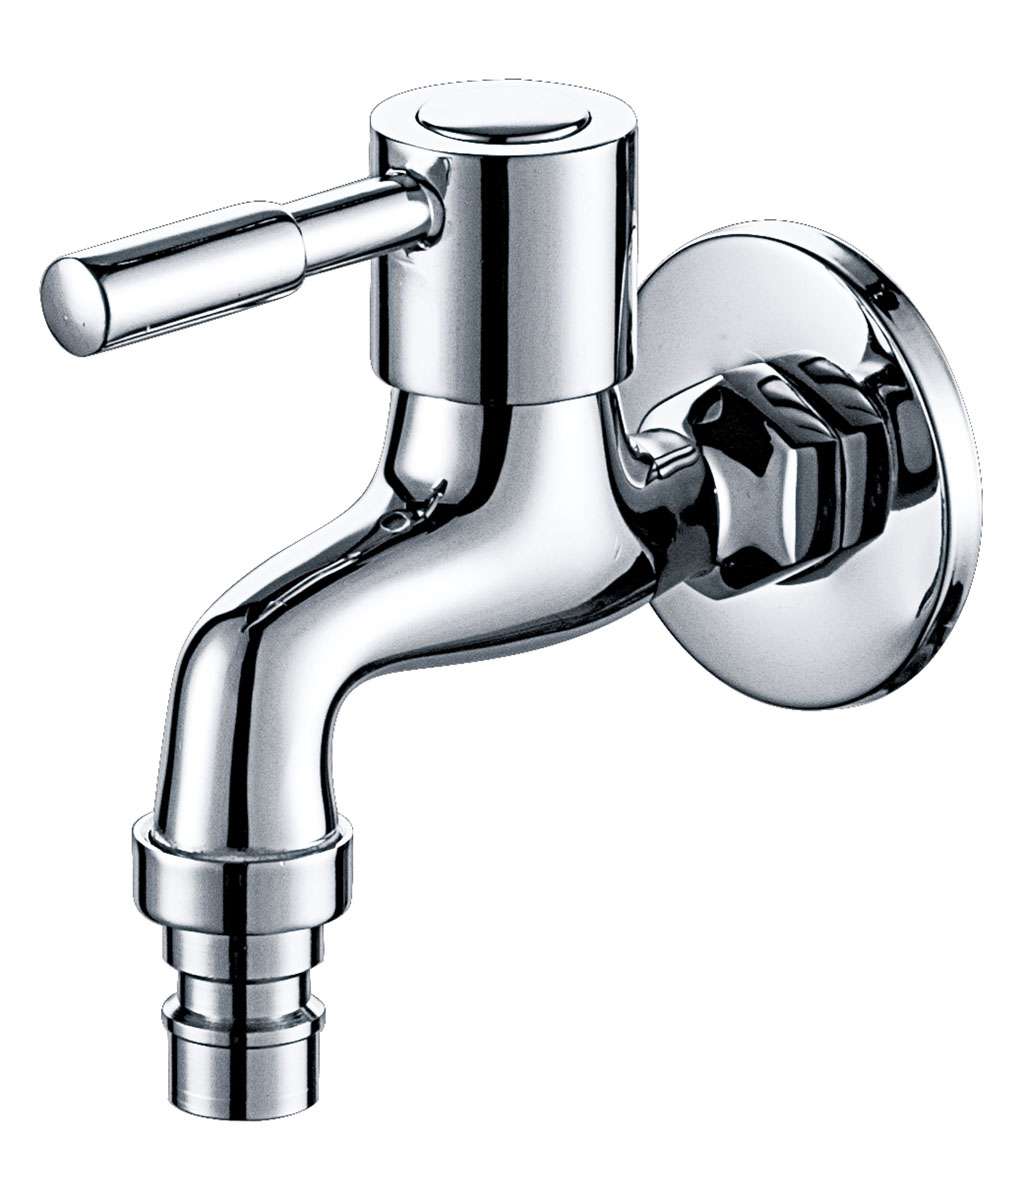 Faucet angle valve for indoor use